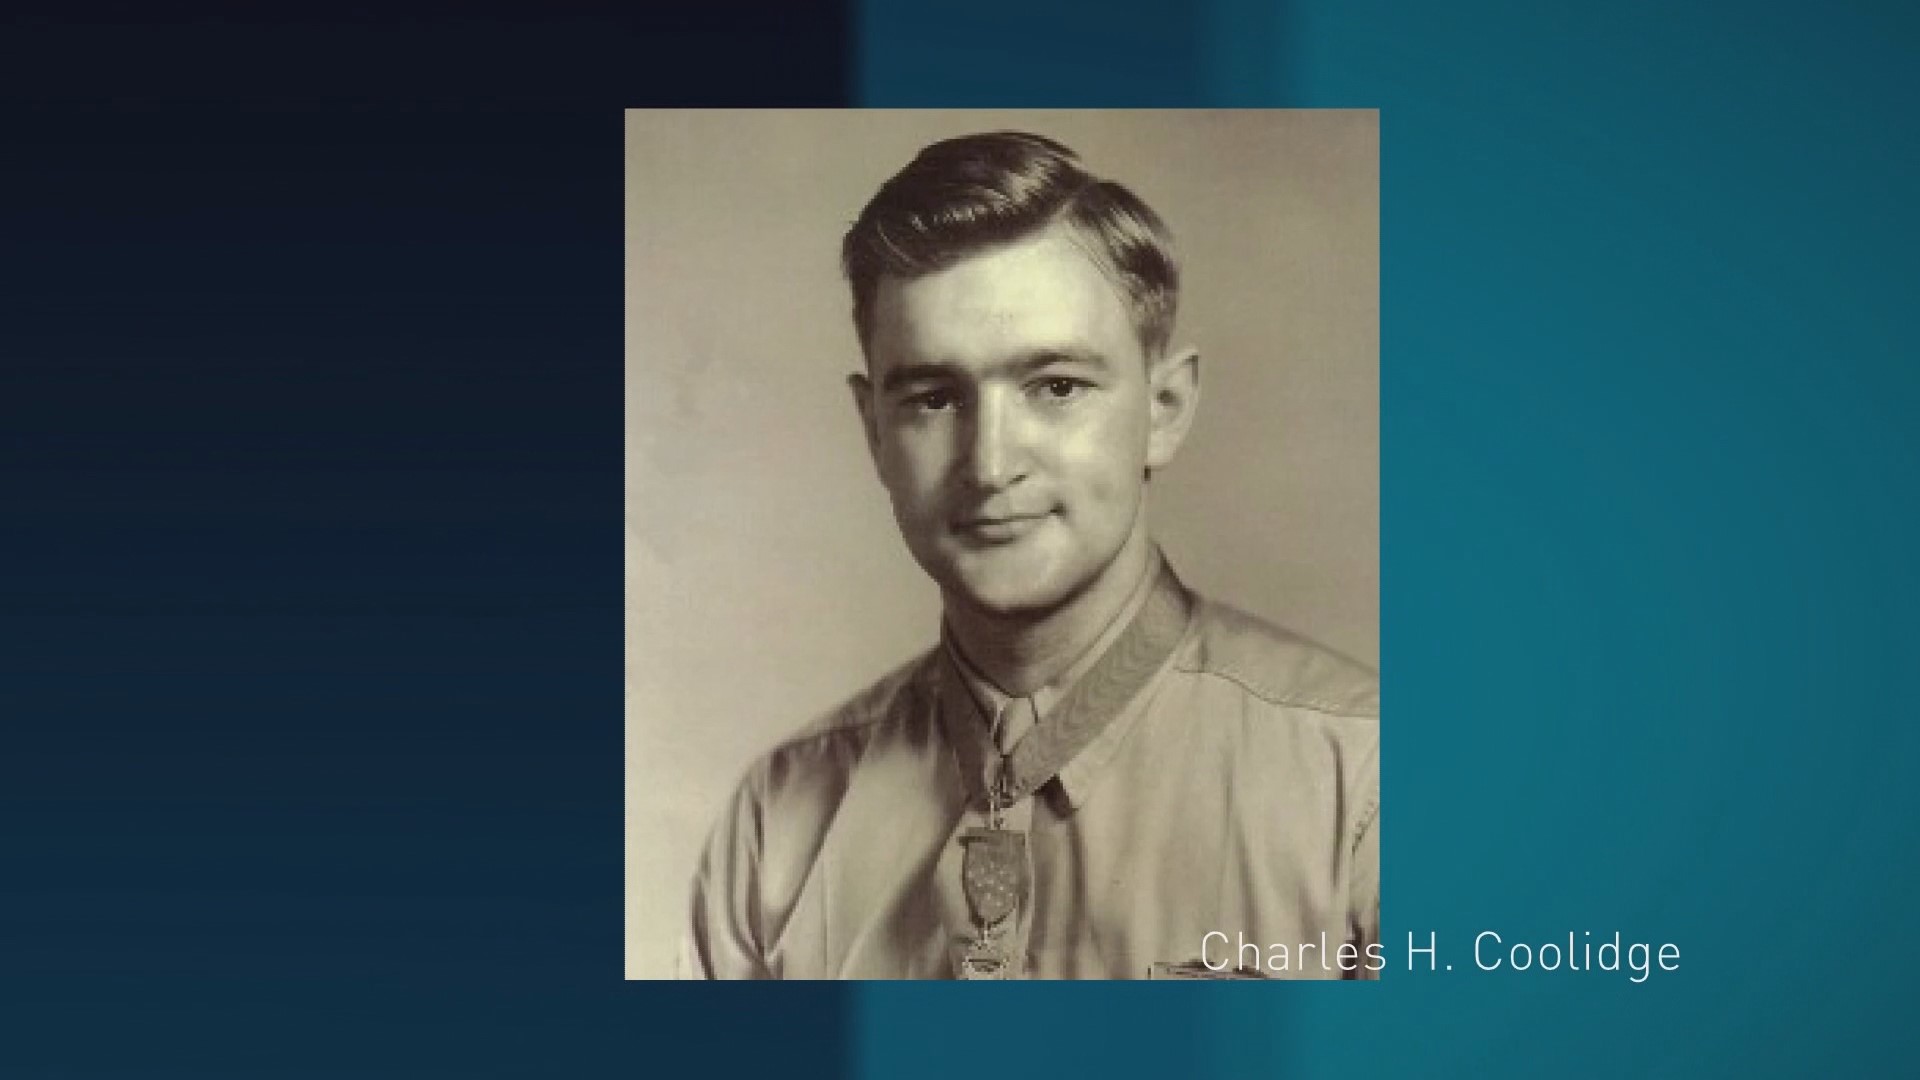 Out of the millions who have served in the U.S. Armed Forces, only 3,507 have received the Medal of Honor. Charles H. Coolidge is one of 14 recipients from East TN.